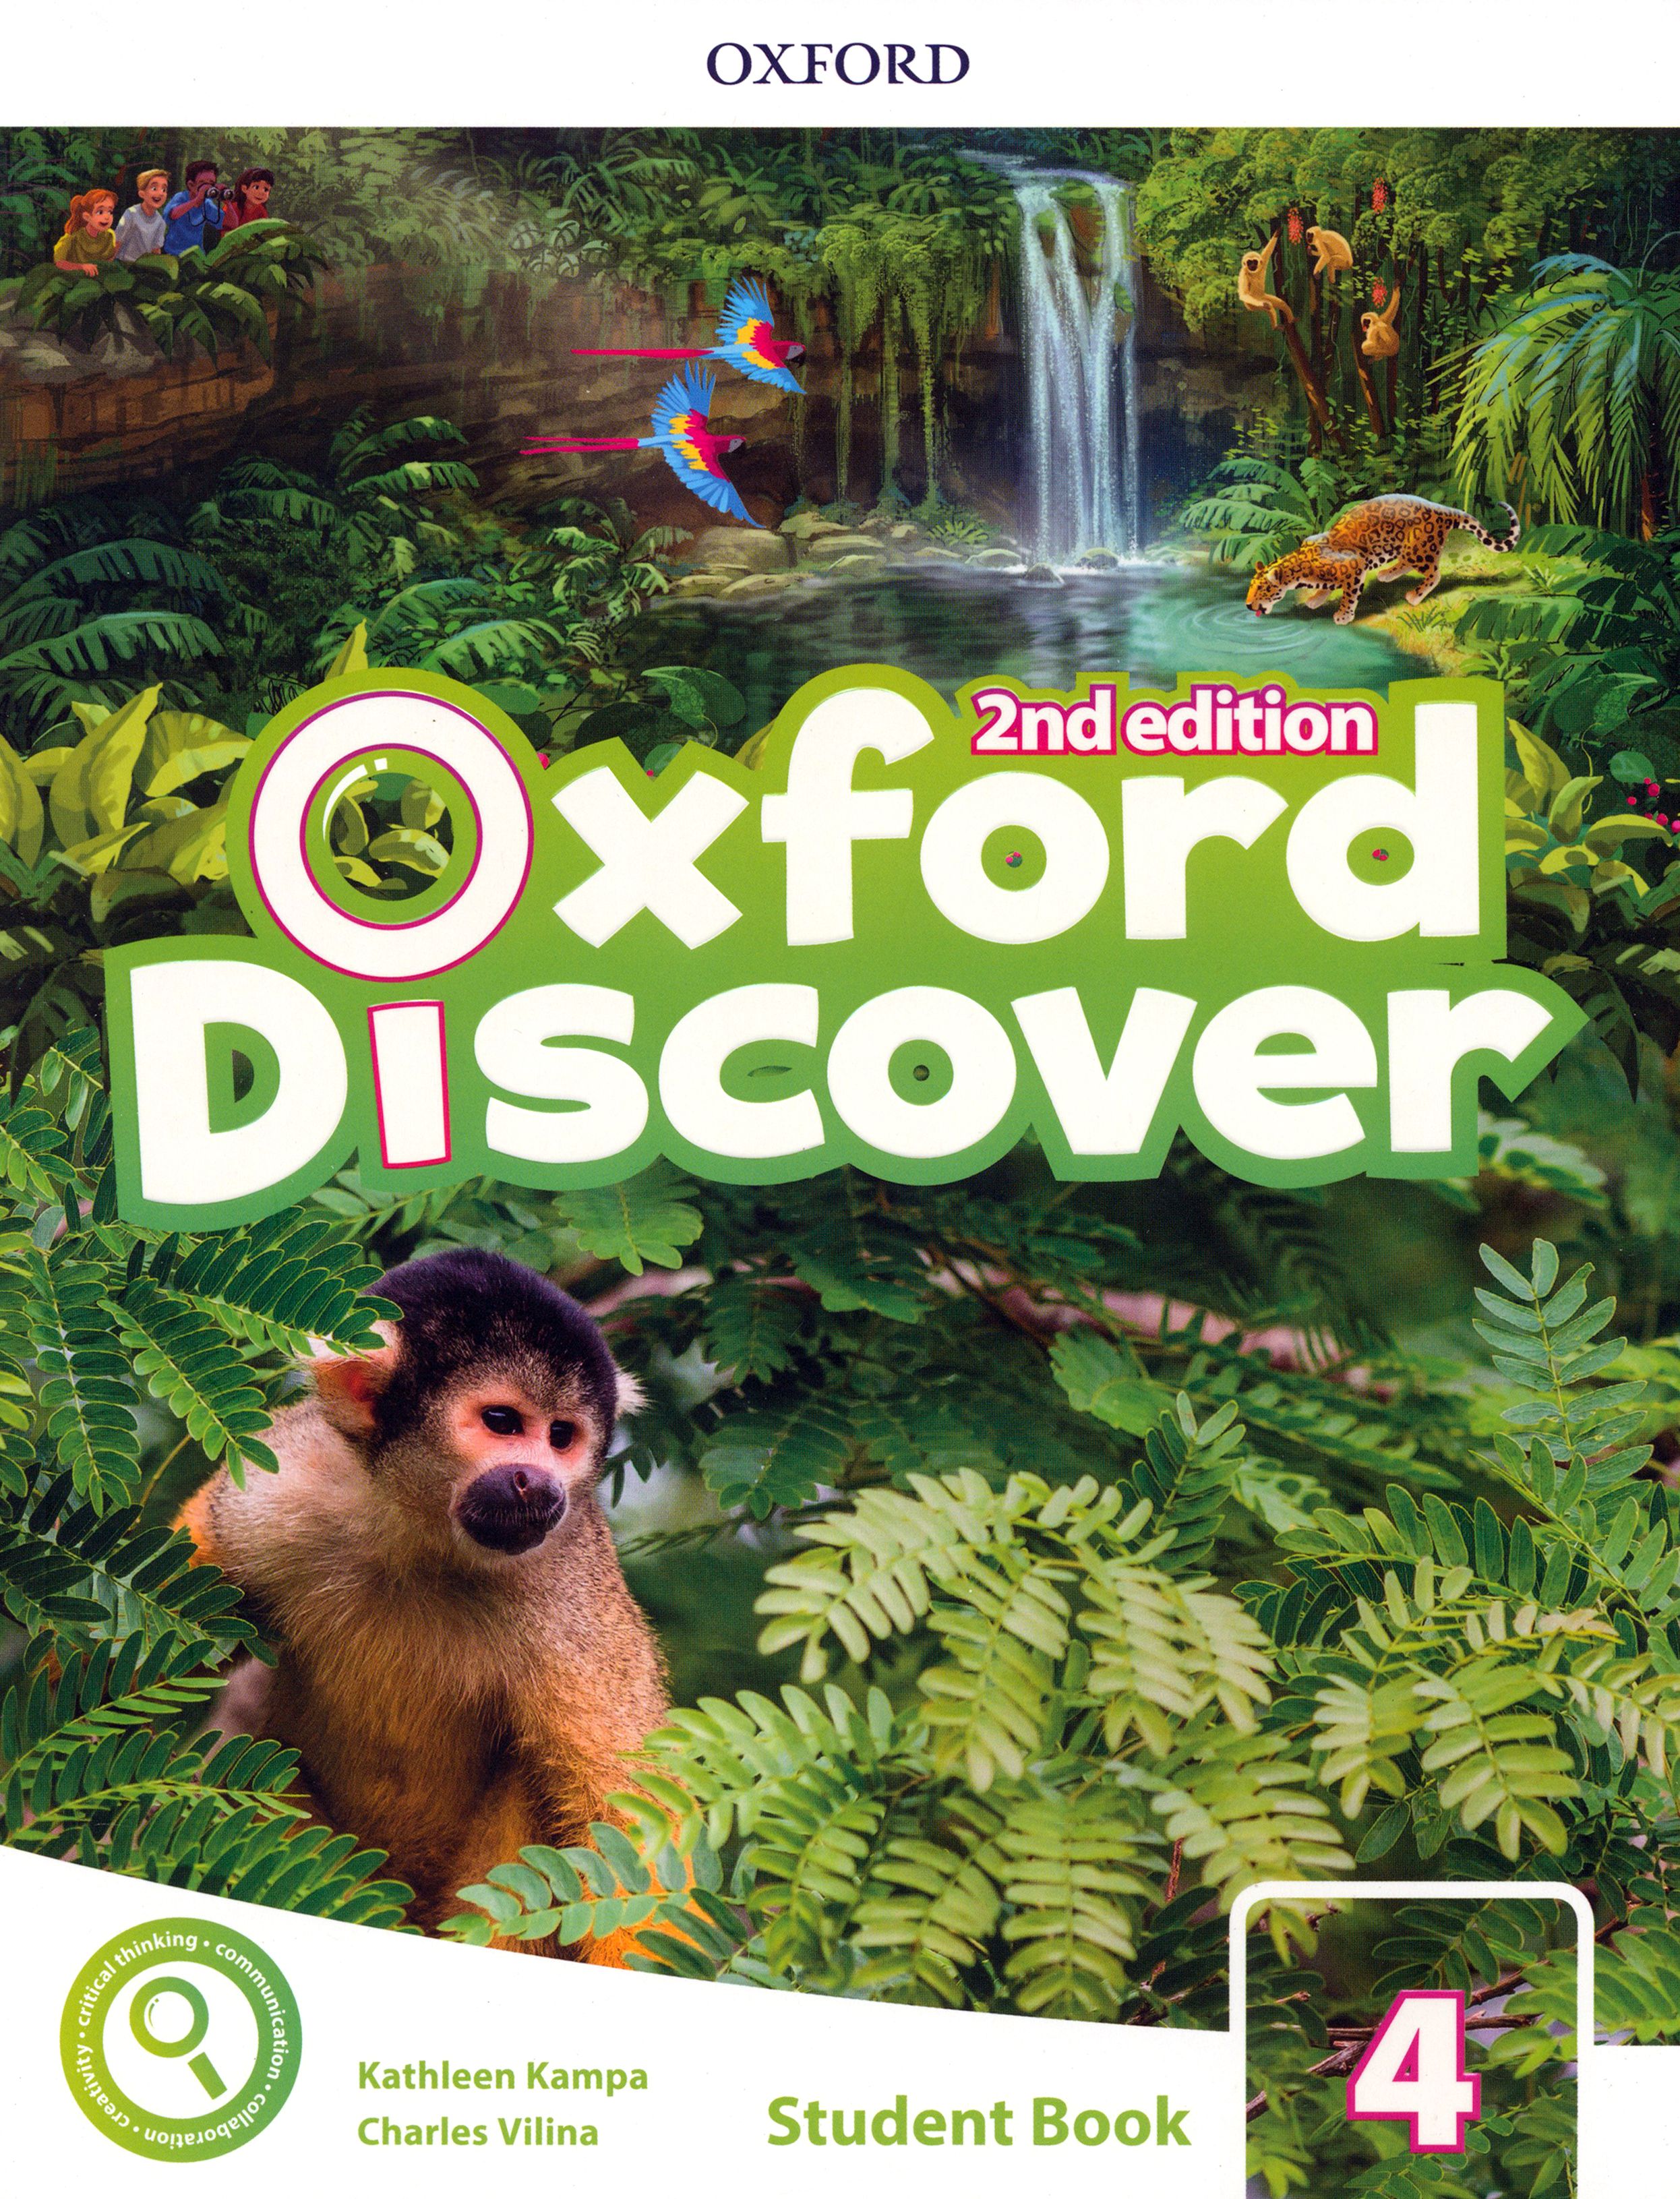 Oxford discover 4 2nd Edition. Oxford discover 2nd Edition 5. Oxford discover 2nd Edition. Oxford discover 2 student book. Oxford discover book